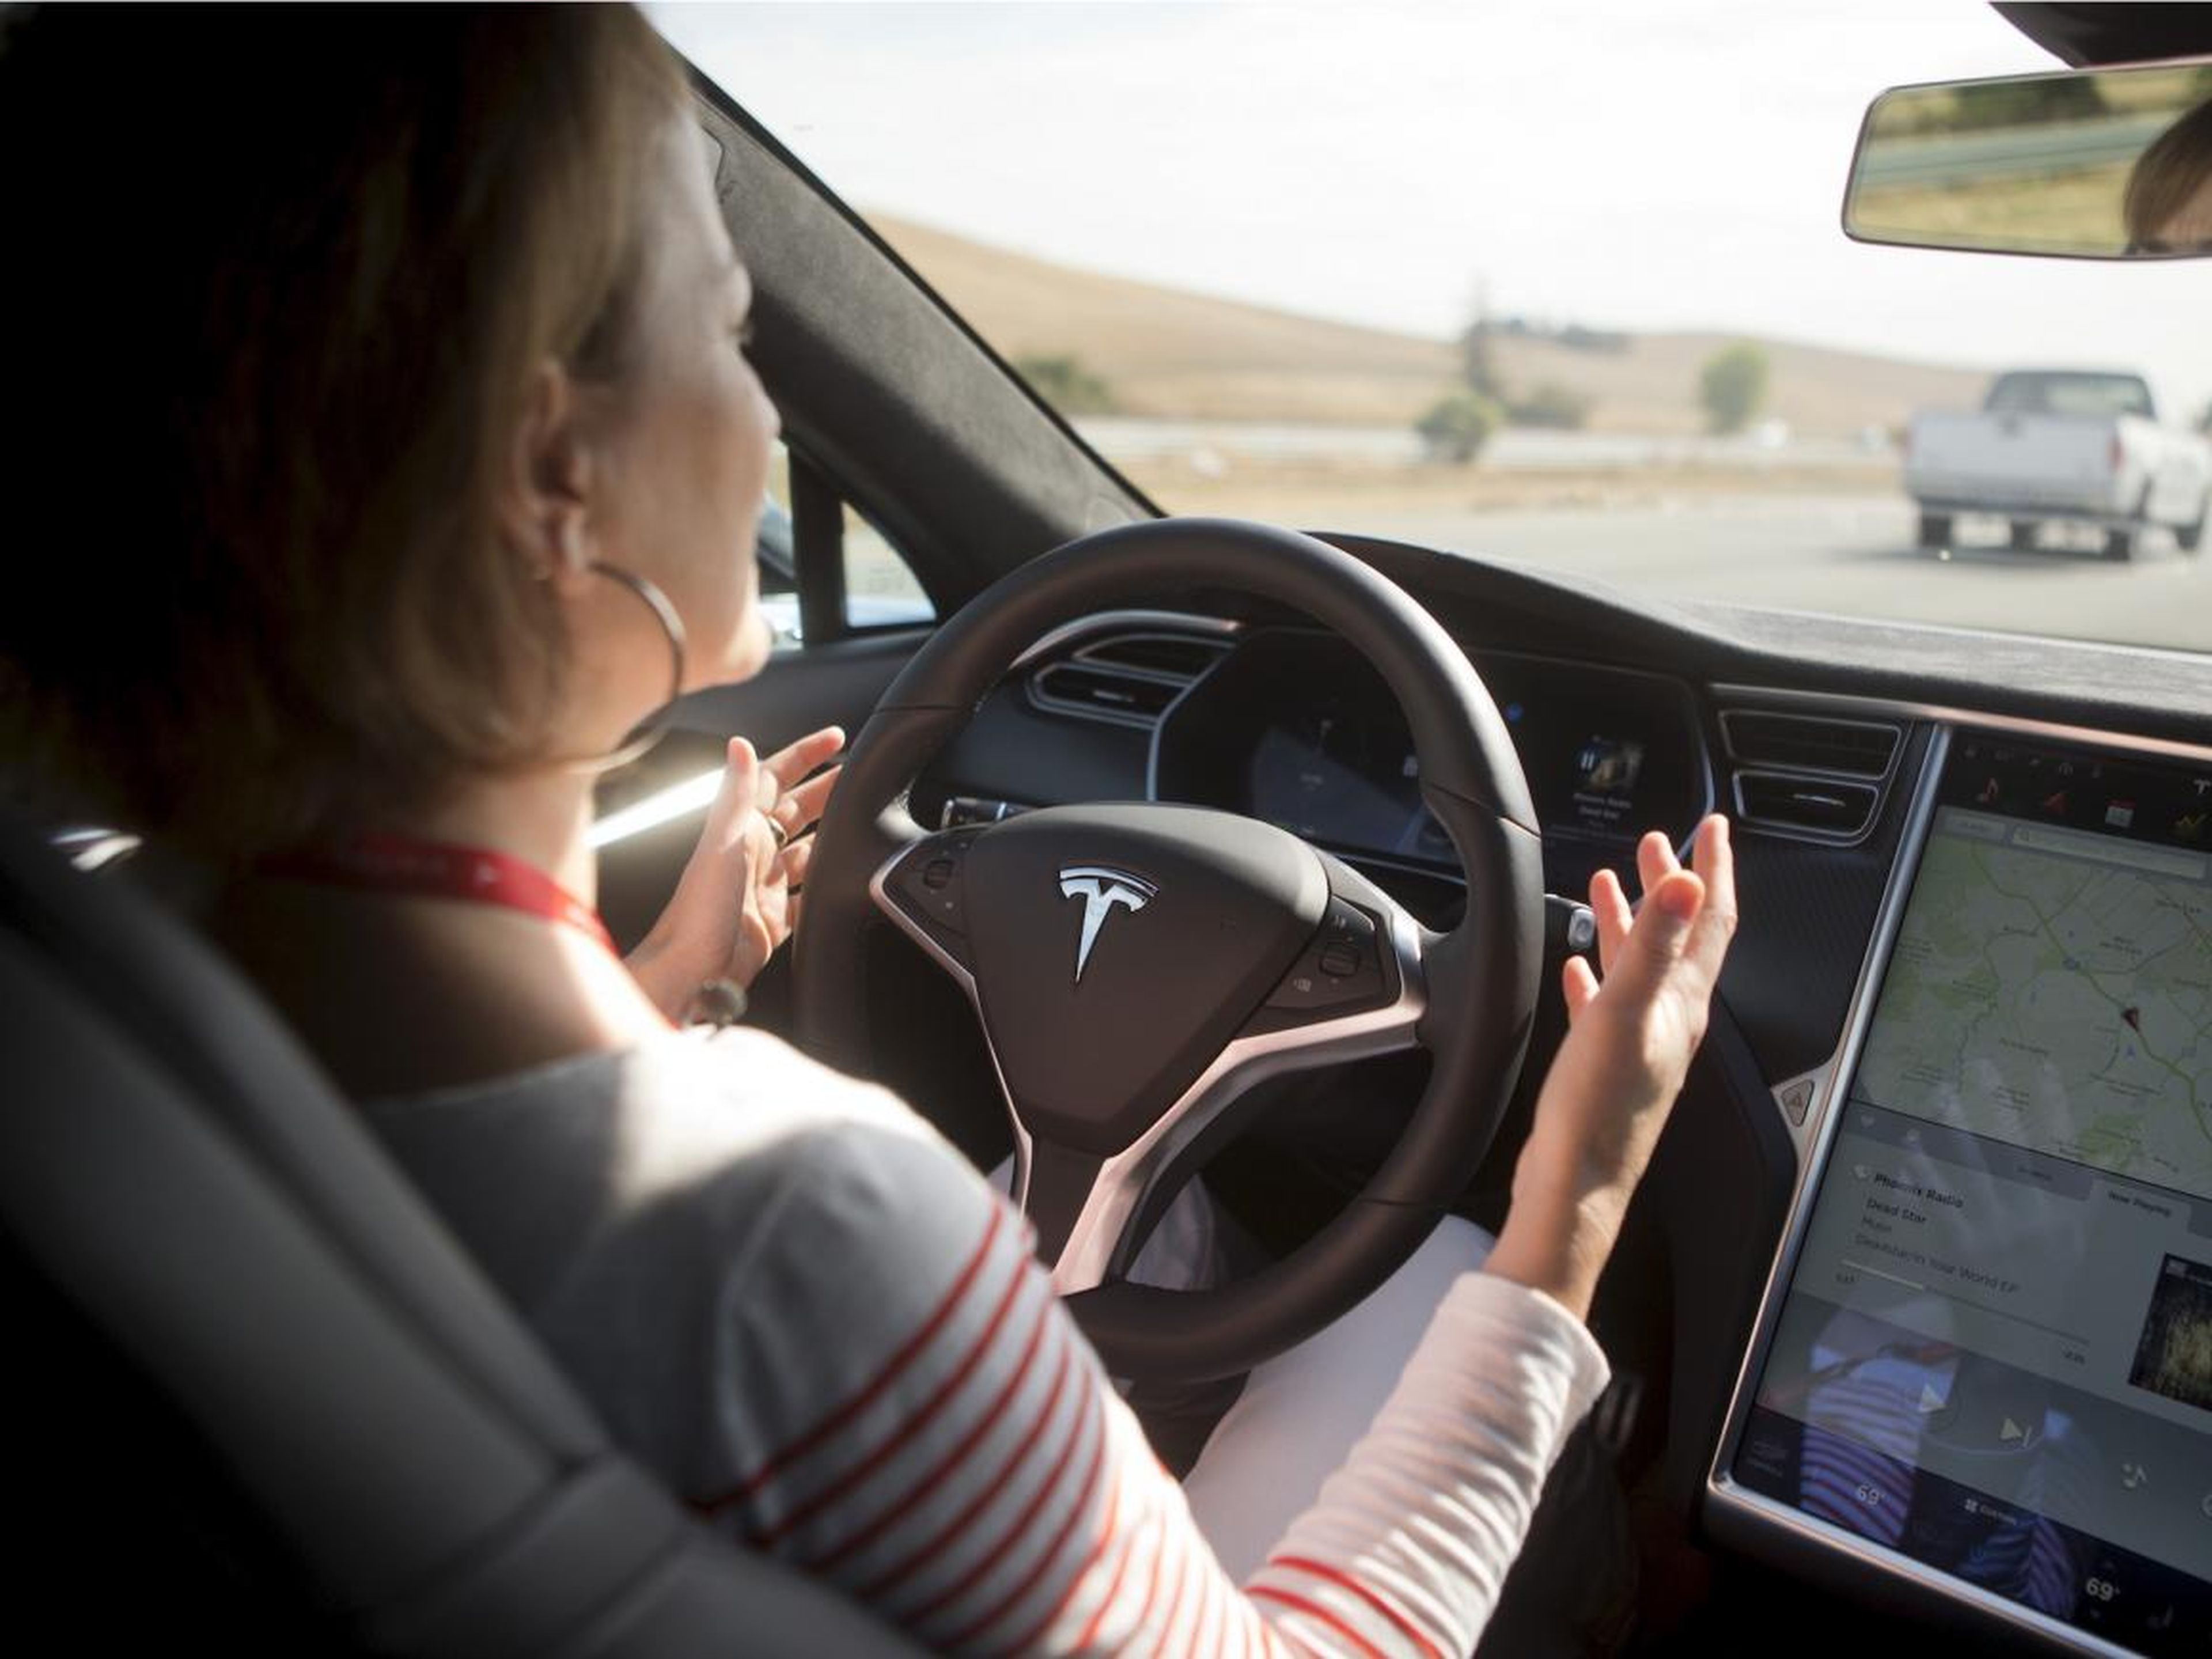 Semi-autonomous driving systems rely on unrealistic expectations about human behavior, according to Duke professor Mary Cummings.